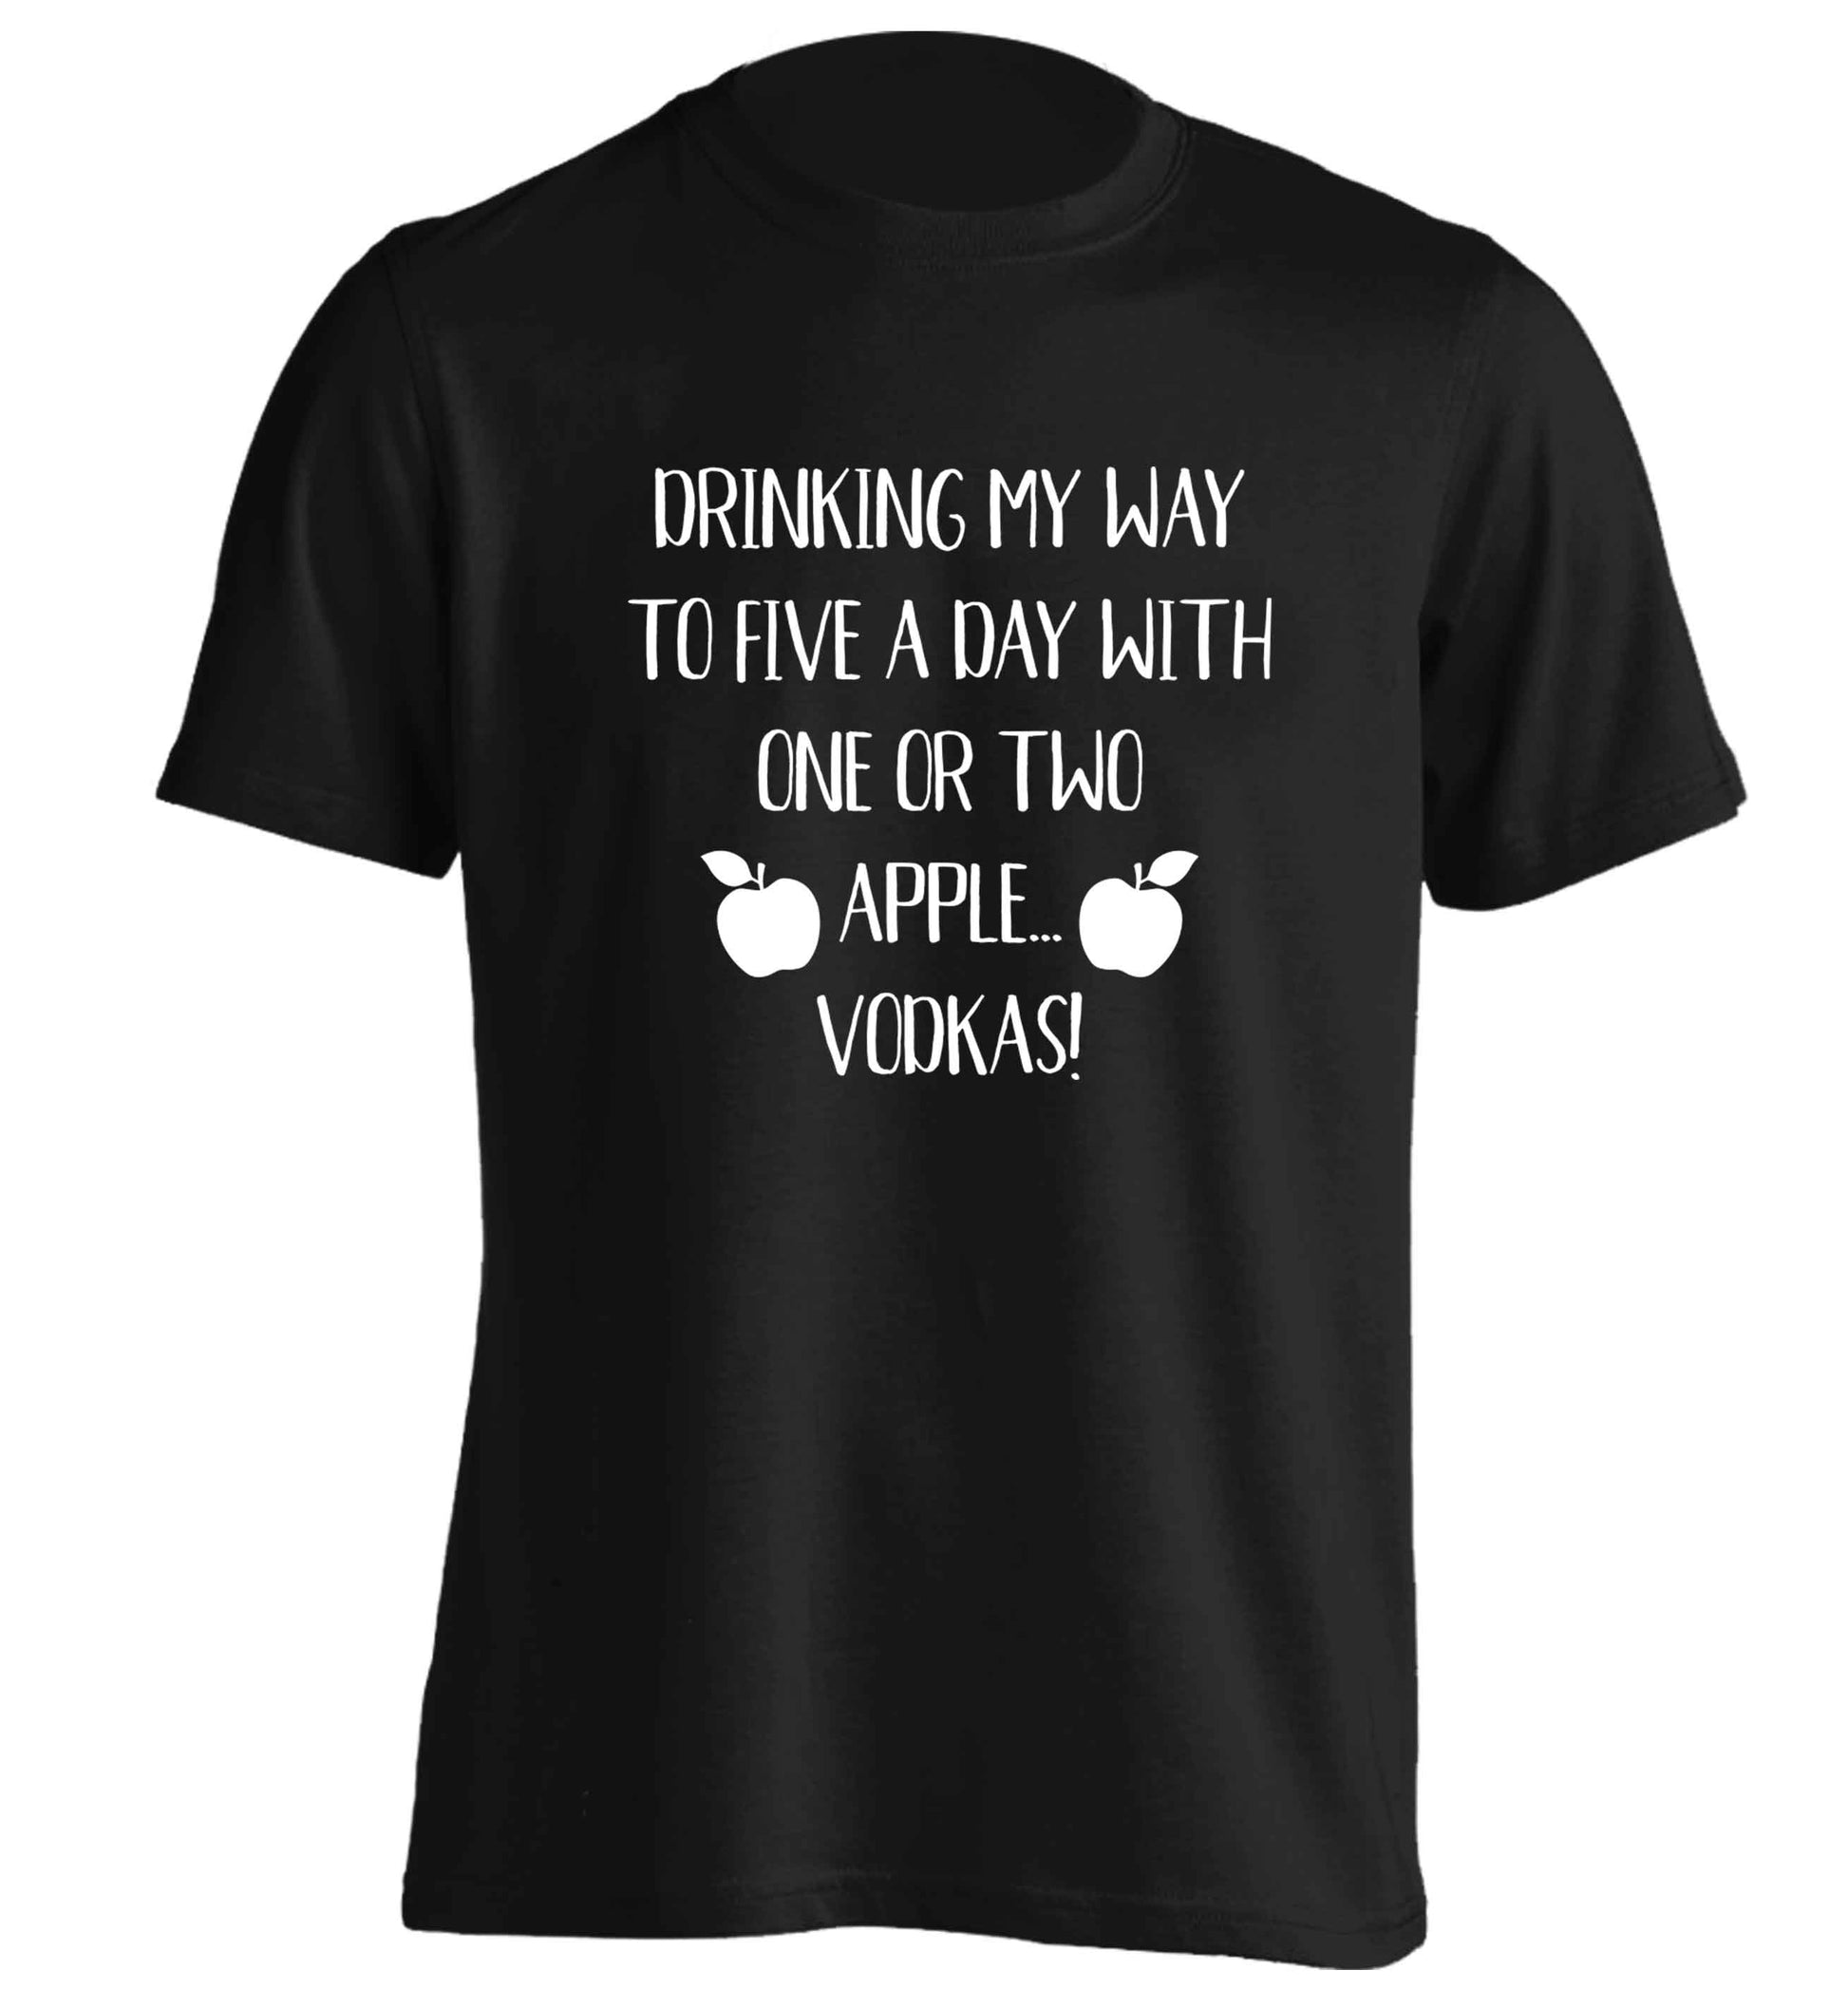 Drinking my way to five a day with one or two apple vodkas adults unisex black Tshirt 2XL